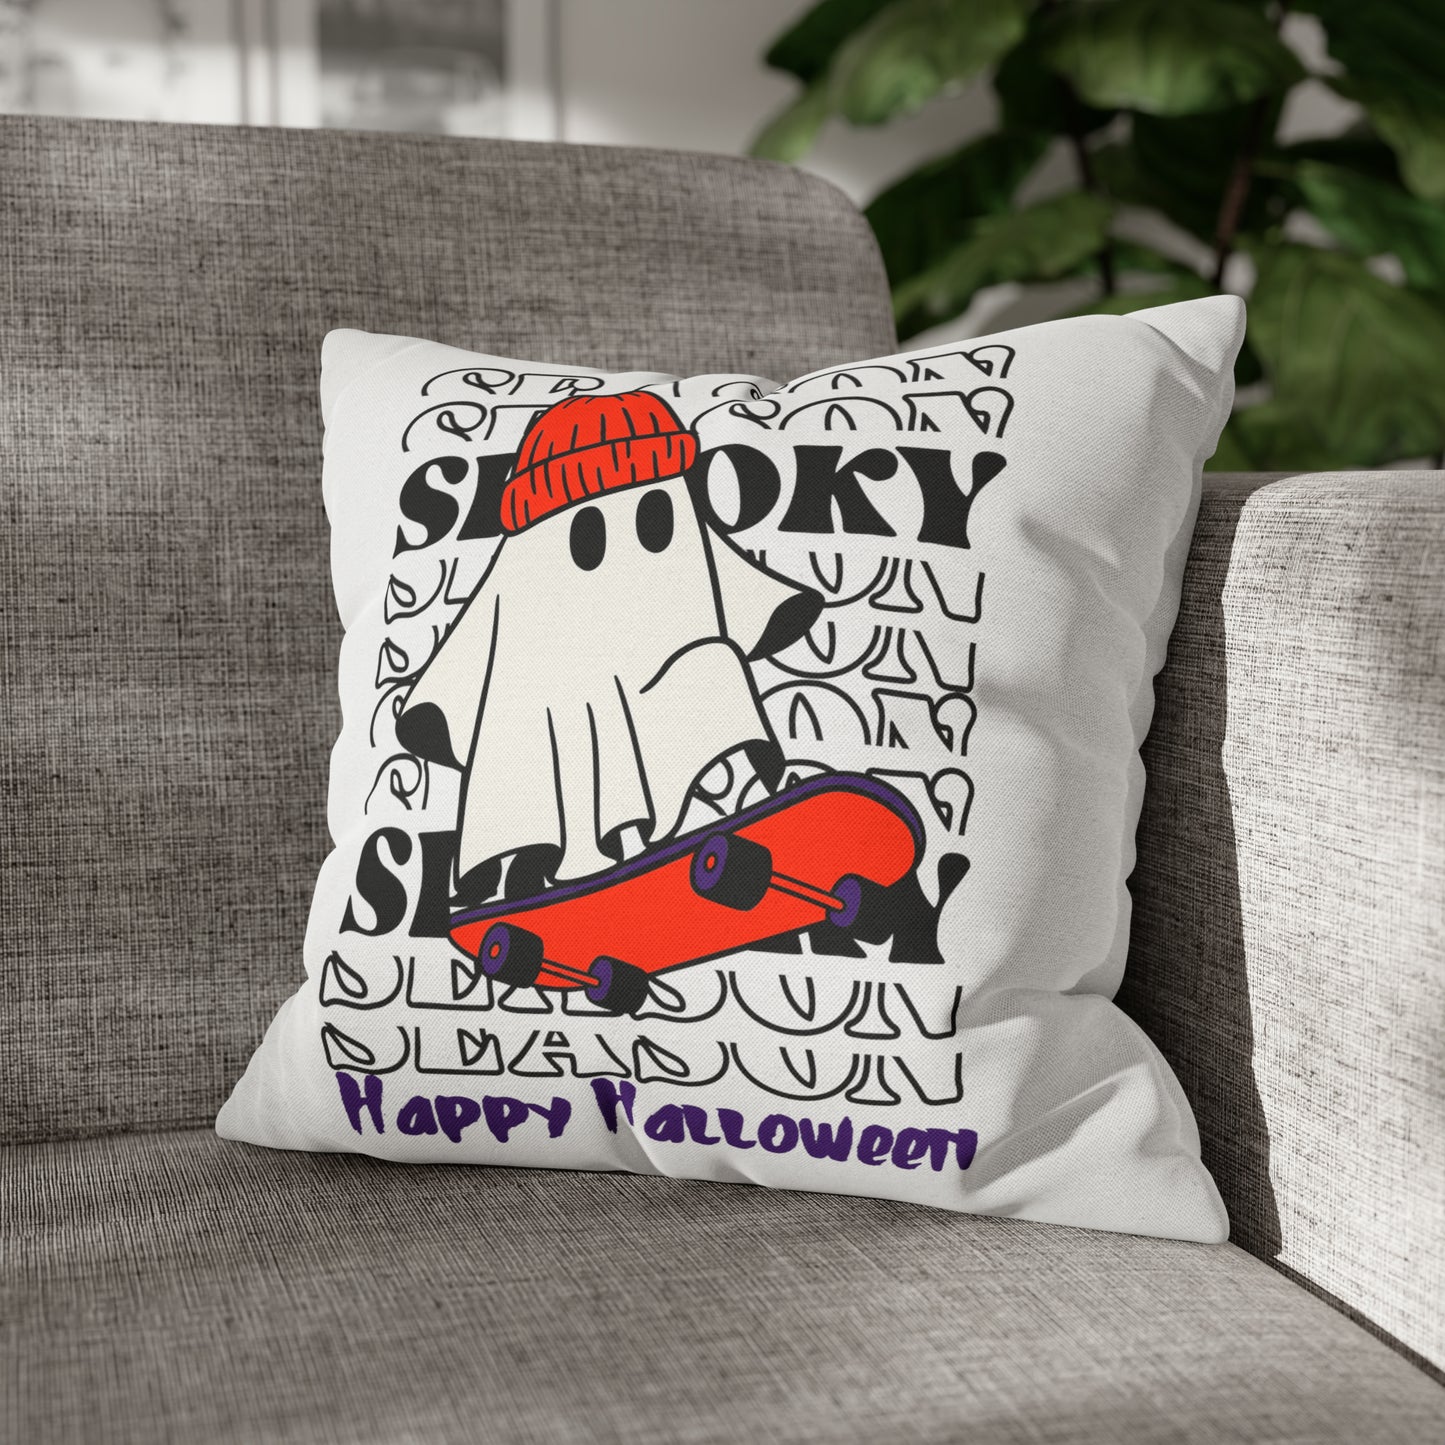 Spun Polyester Square Pillow Case - Halloween - Little Ghost - 02/04